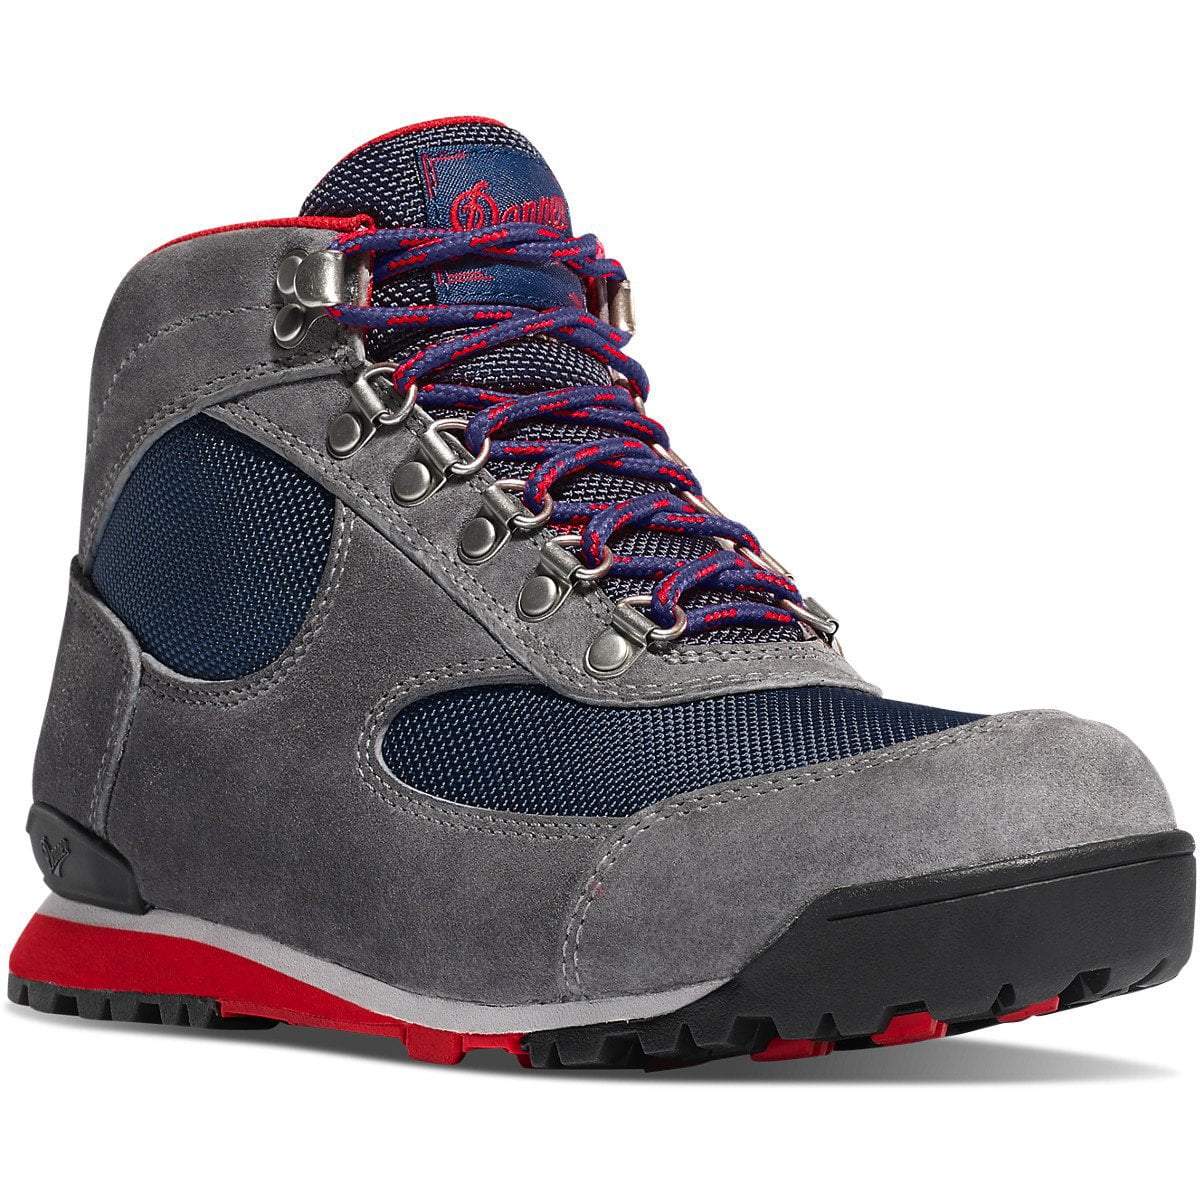 Danner Women's Jag 4.5" Waterproof Hiking Boot in Steel Gray/Blue Wing Teal from the side